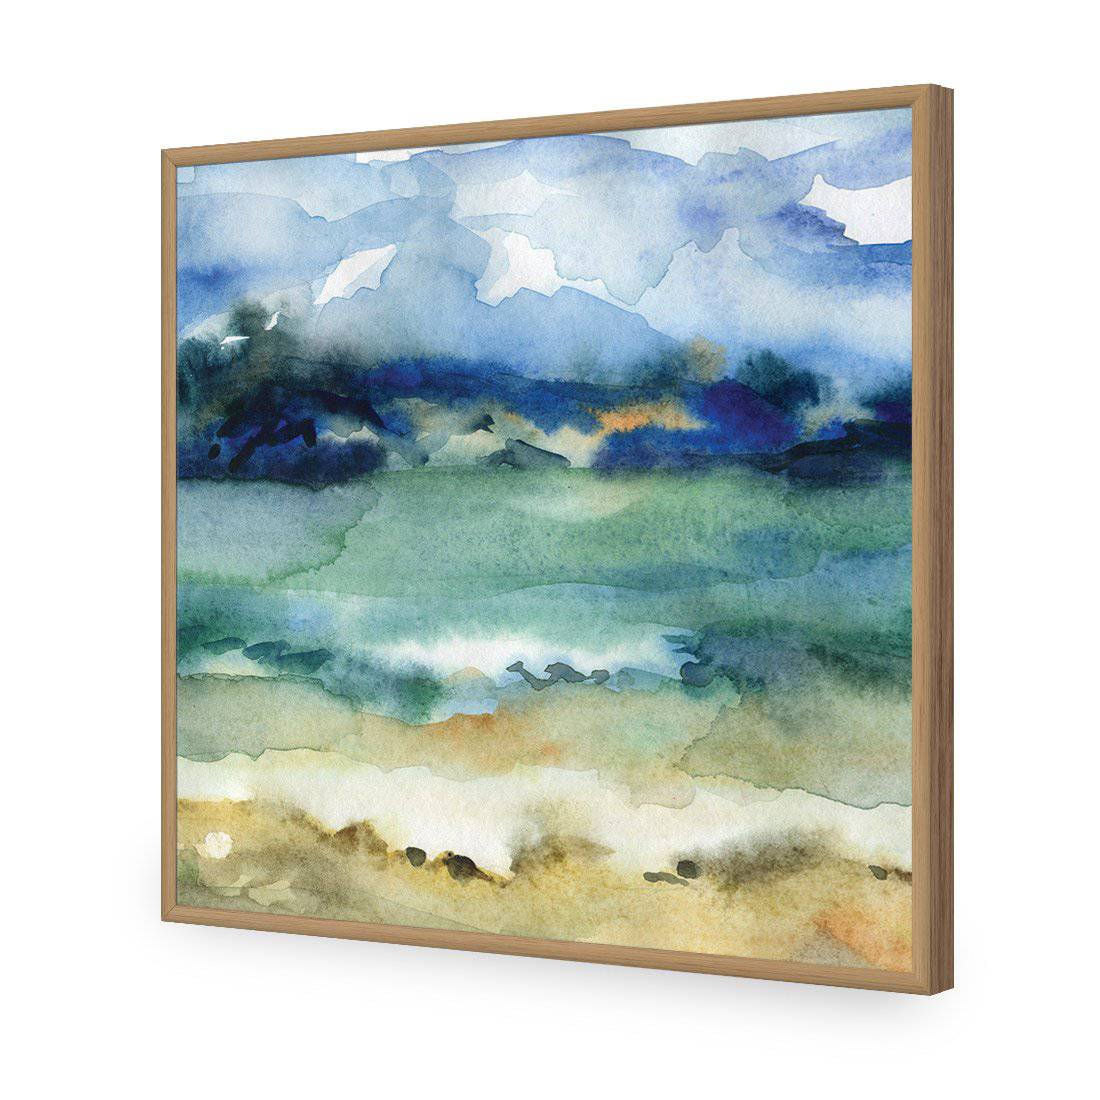 Timeless, Square-Acrylic-Wall Art Design-Without Border-Acrylic - Oak Frame-37x37cm-Wall Art Designs